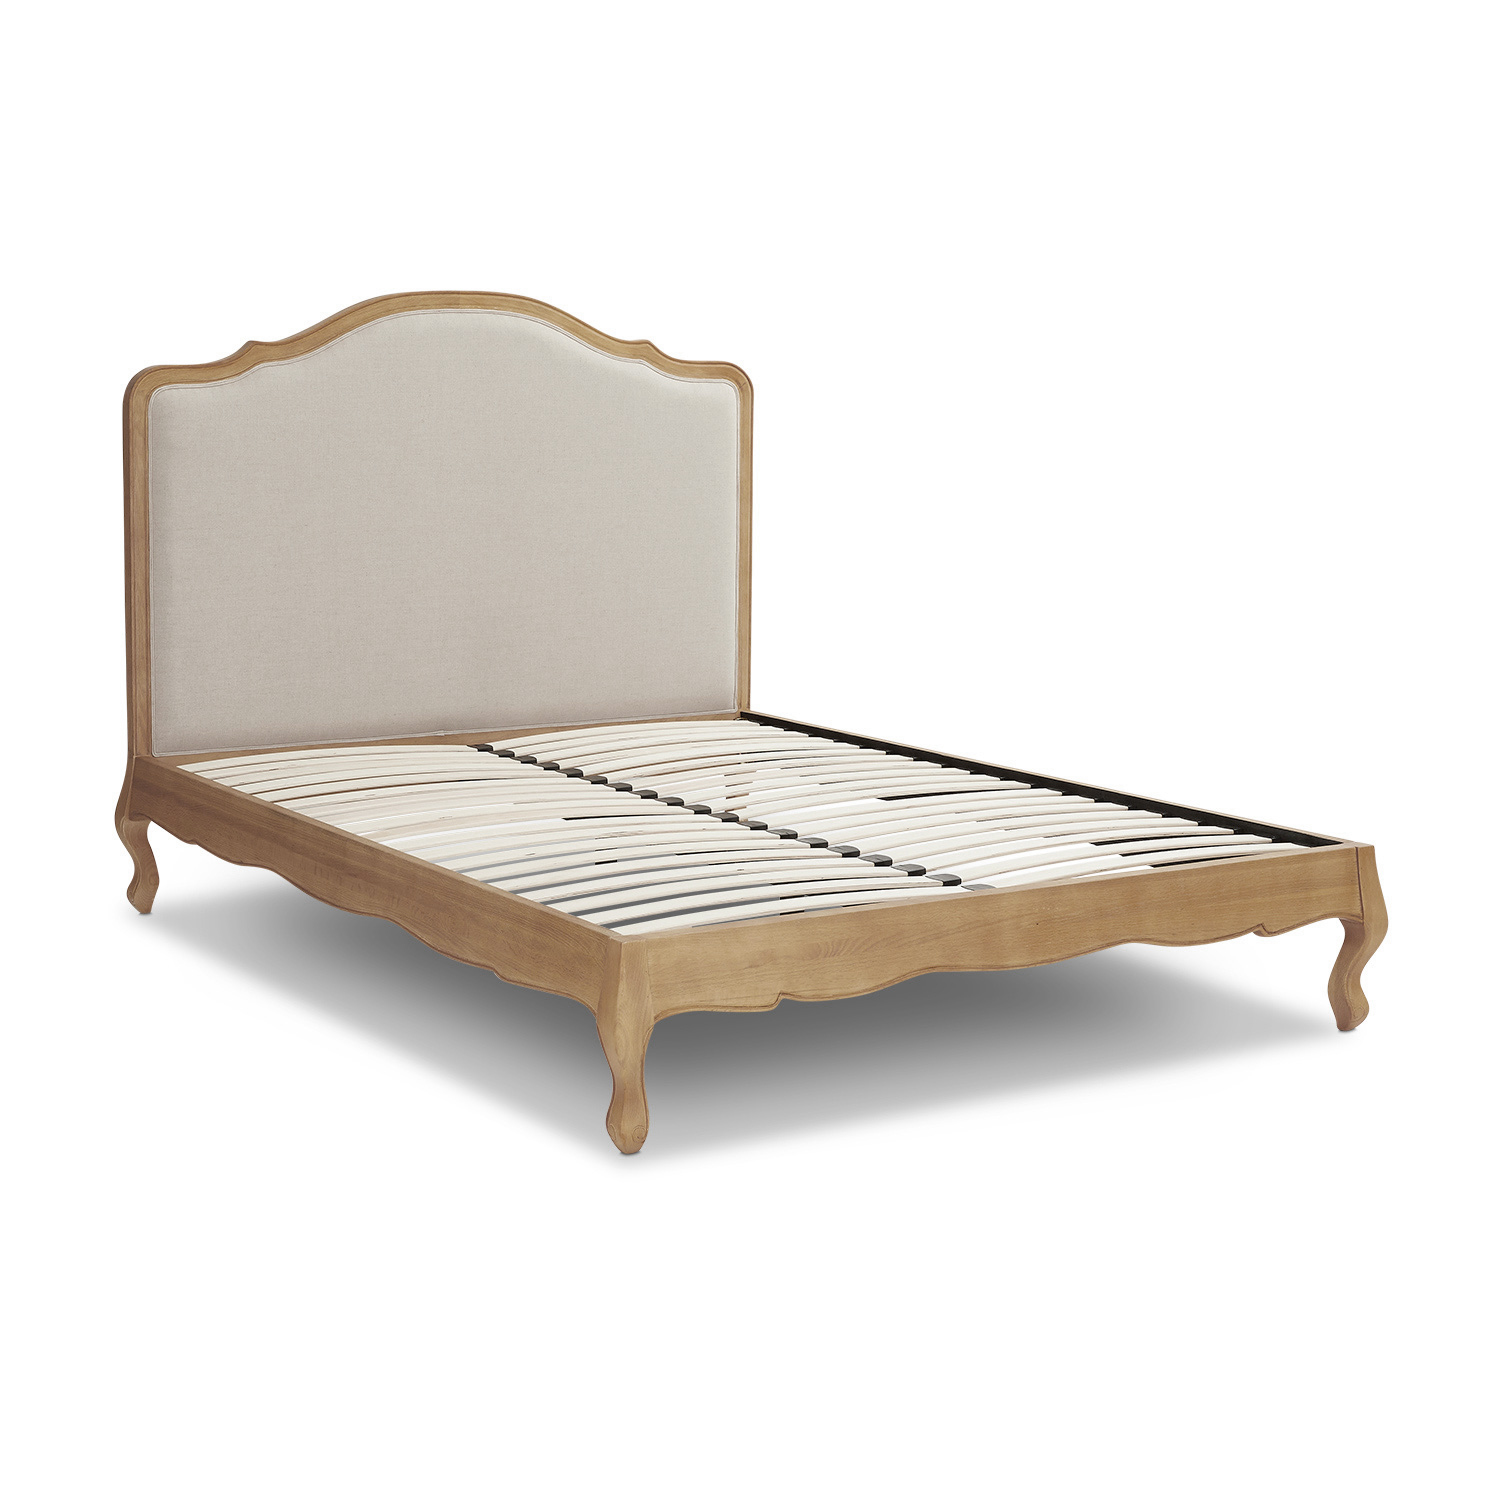 Alice French Light Oak Upholstered Low Foot Board Bed – Super King Size